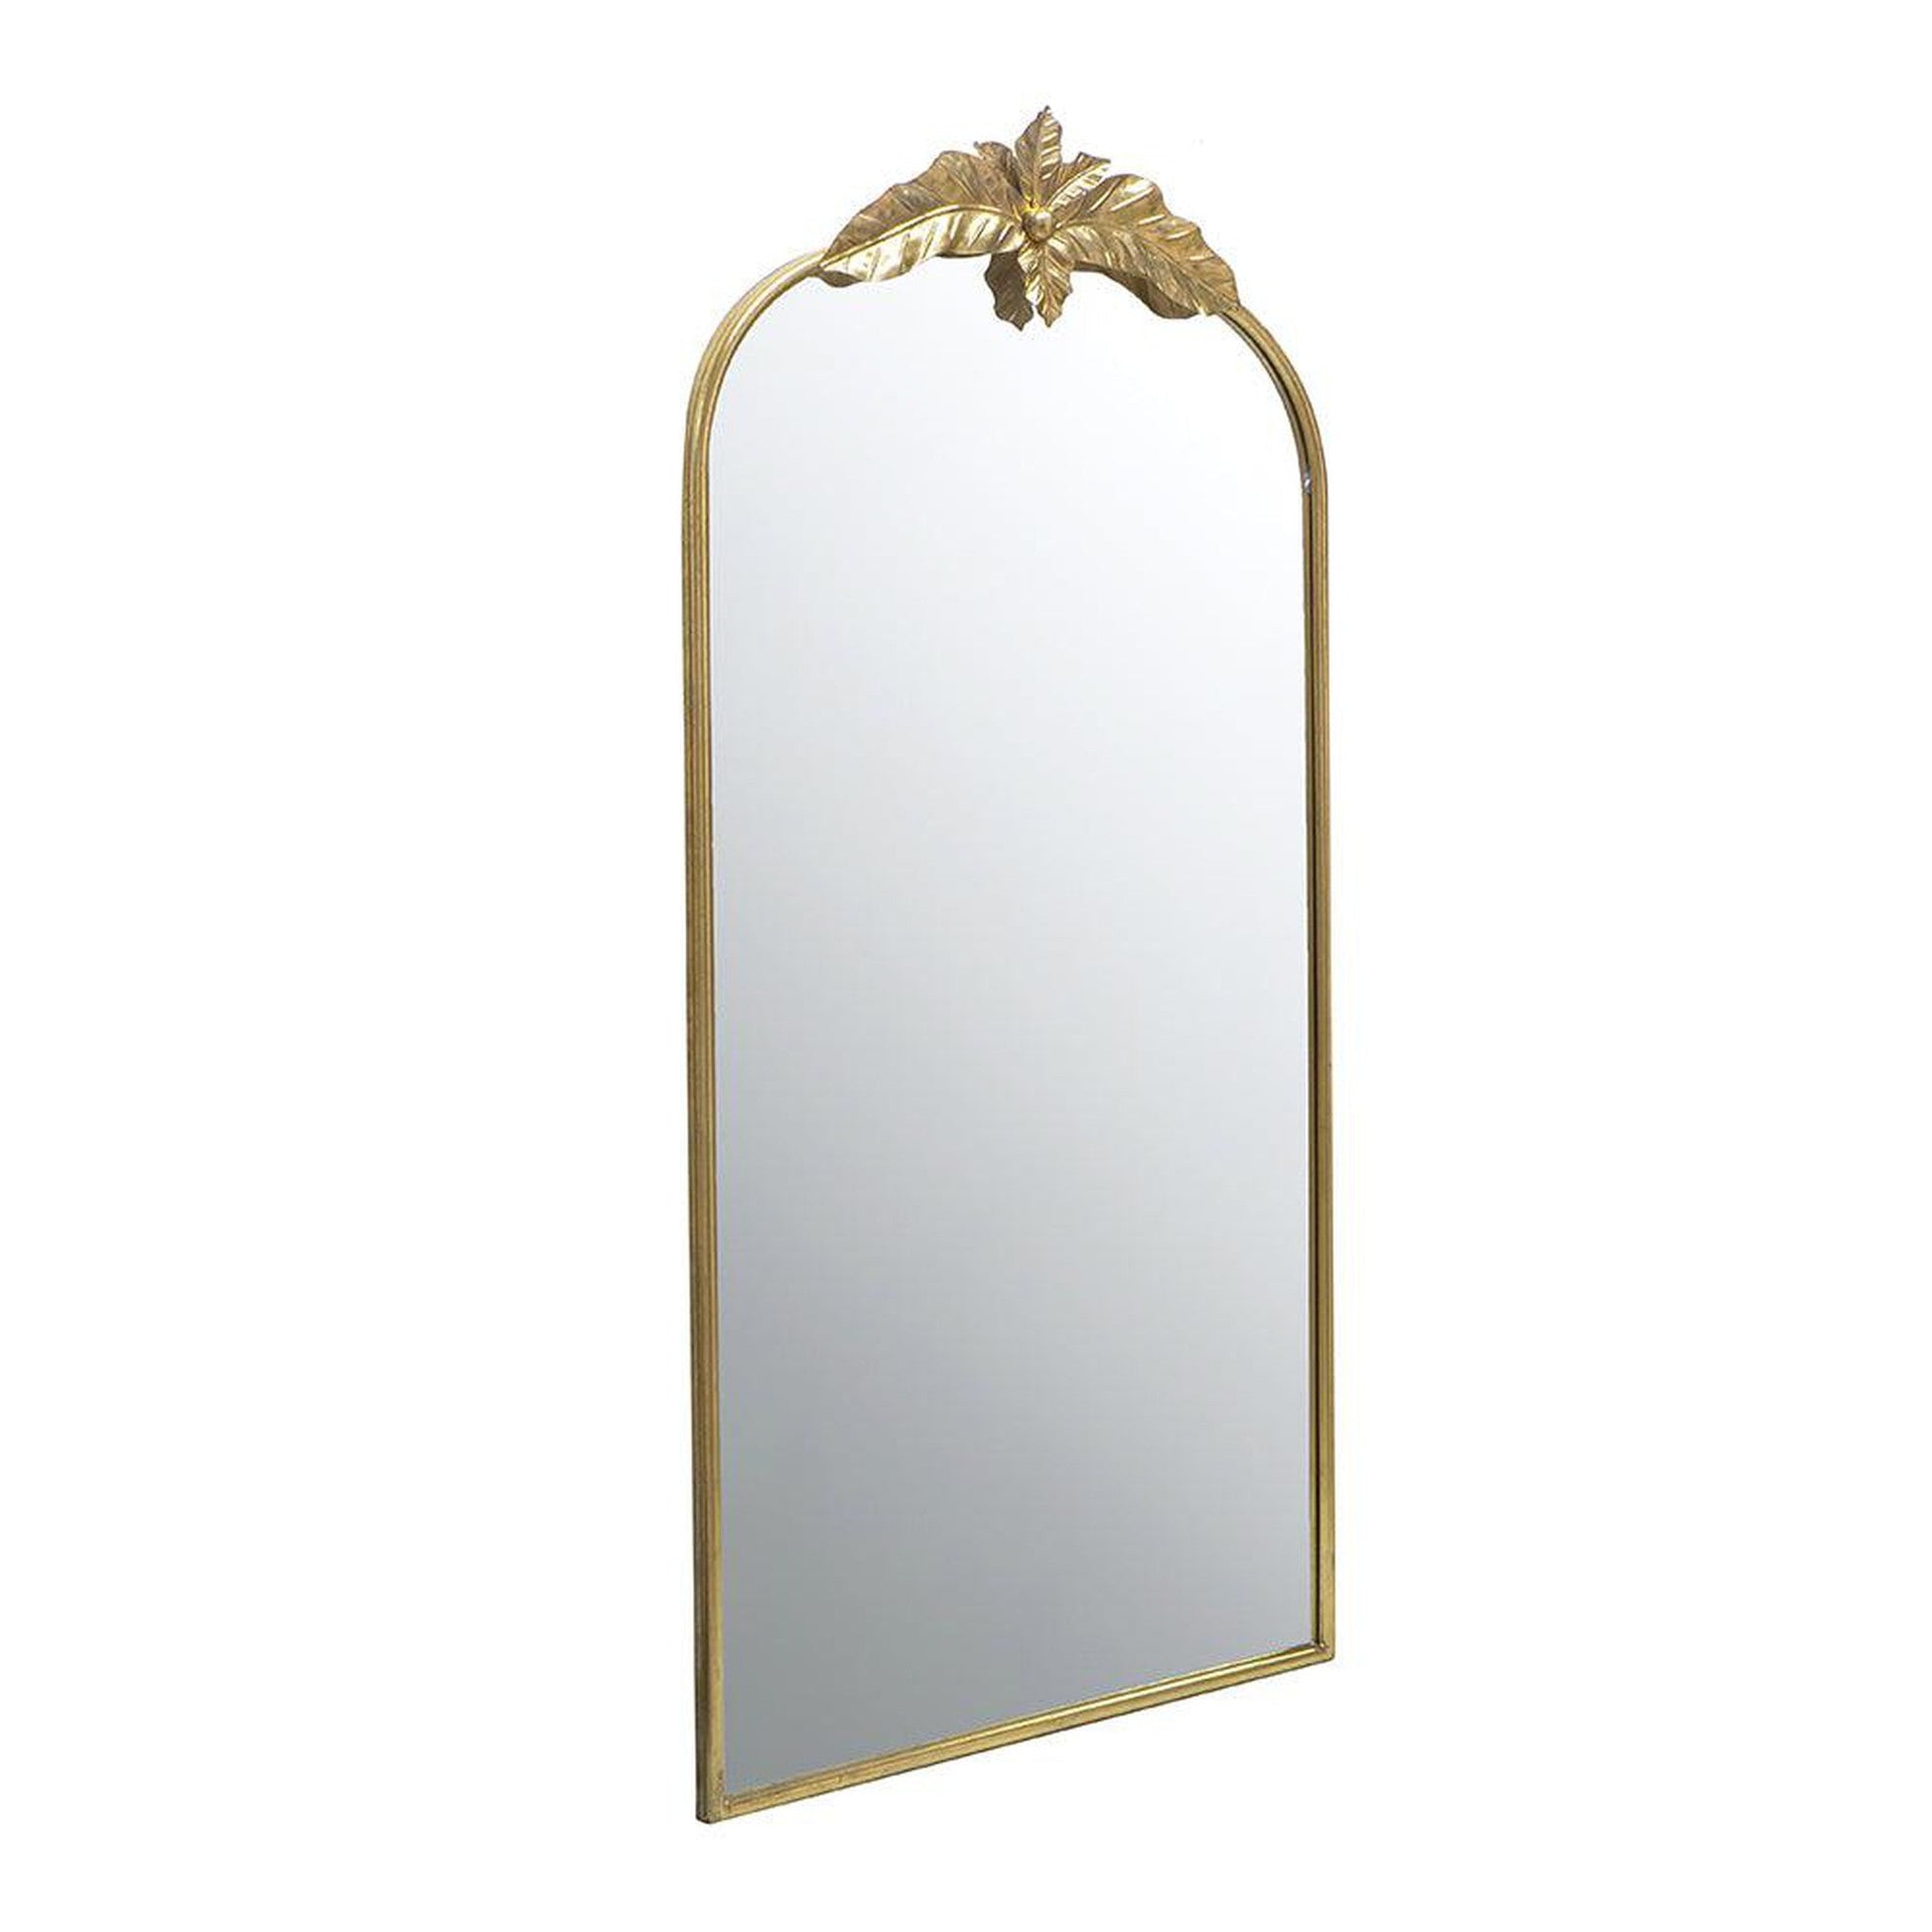 A&B Home 36" x 66" Bundle of 6 Large Arched Gold Leaf Accent Framed Floor Mirror